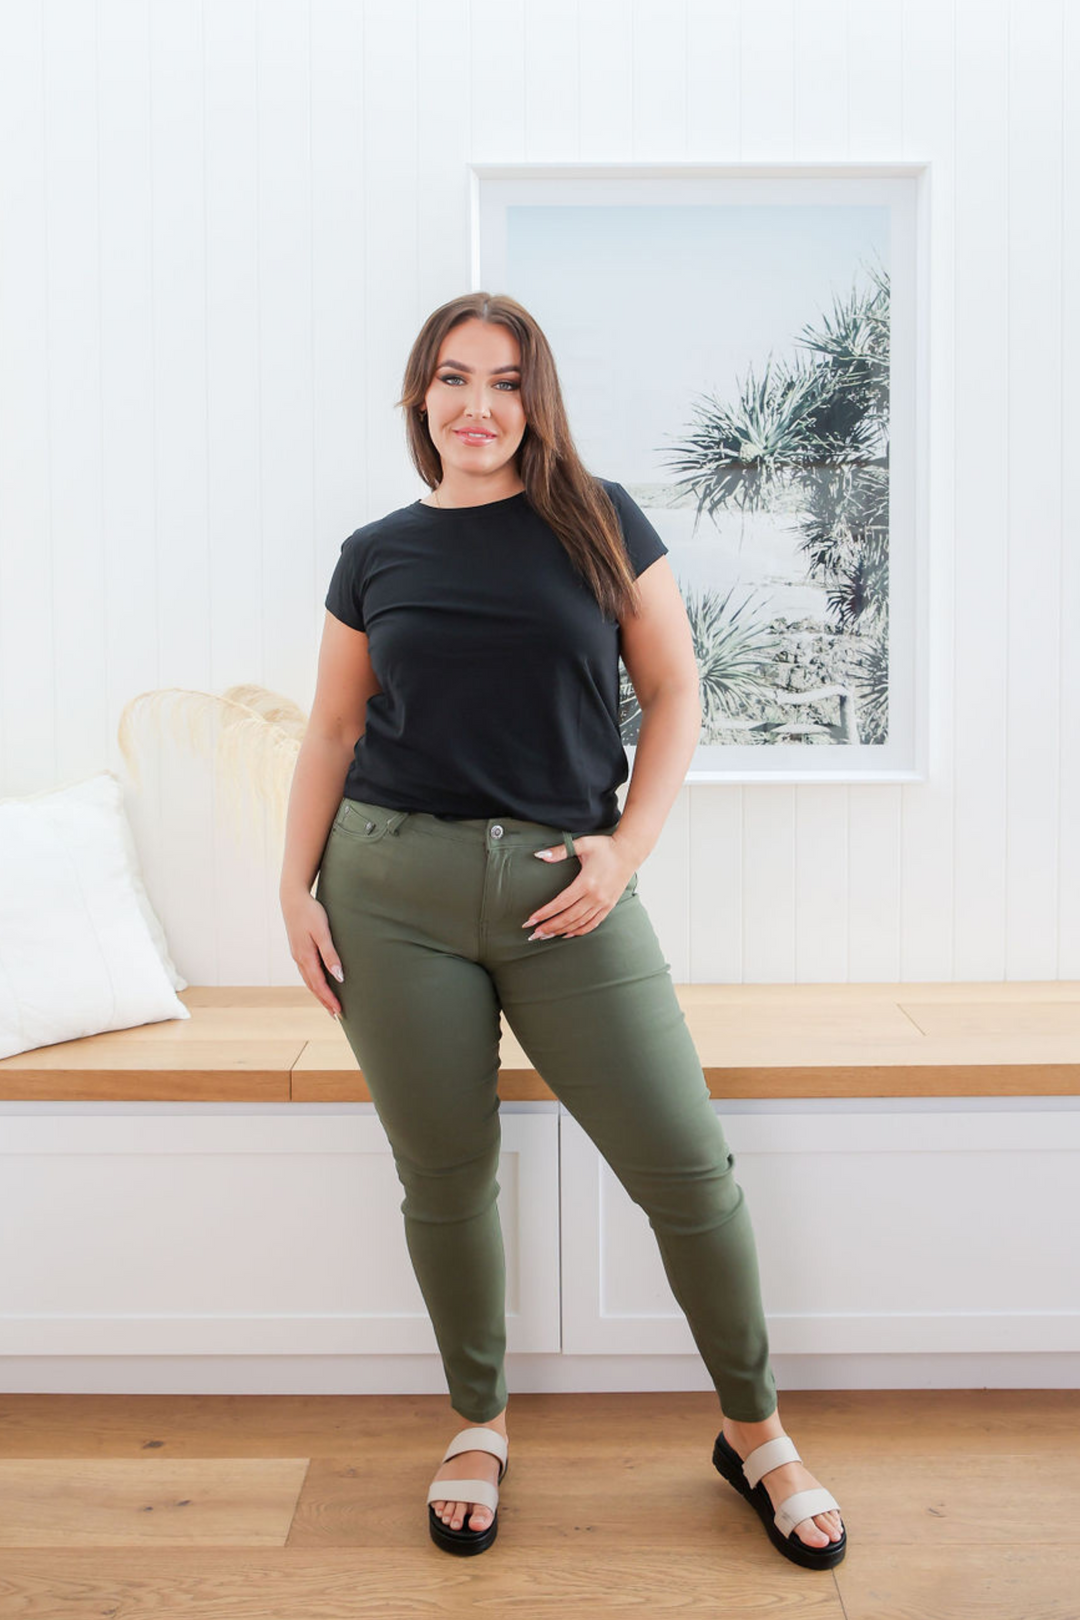 Ladies Full Length Jeans - Stretch Jeans - Slimming Cut - Functional Front + Back Pockets - Zip Up Front - Plus Size Jeans - Sizes 6 - 26 - Delta Jeans Khaki Front Full Length View Size 14- Daisy's Closet